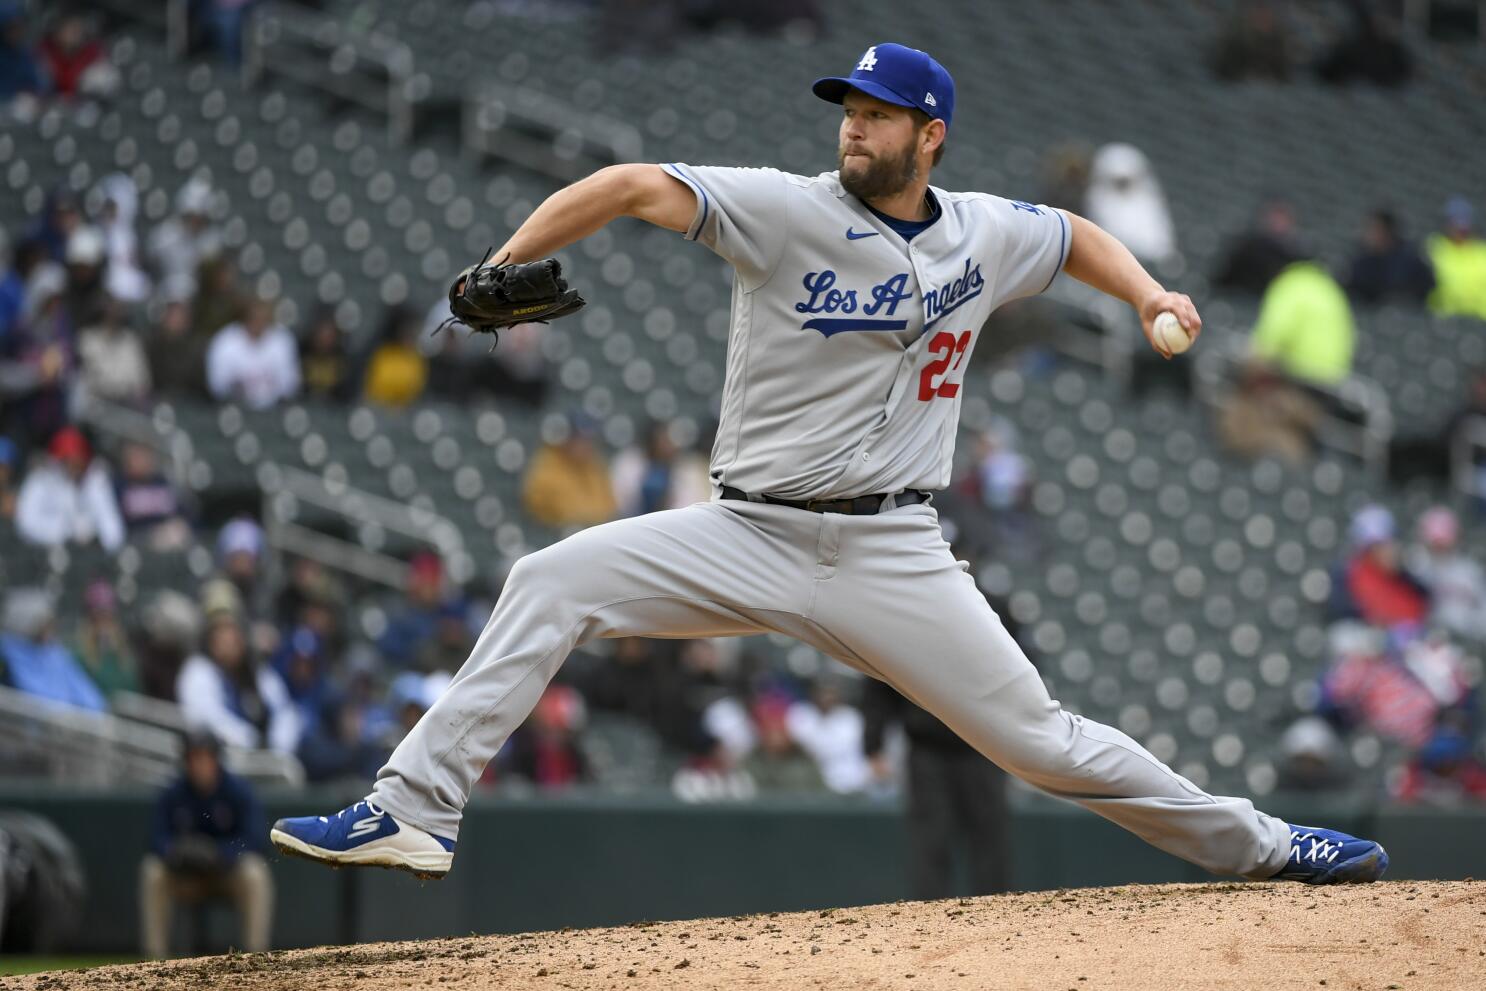 Kershaw perfect through 7 innings, Dodgers beat Twins 7-0 - The